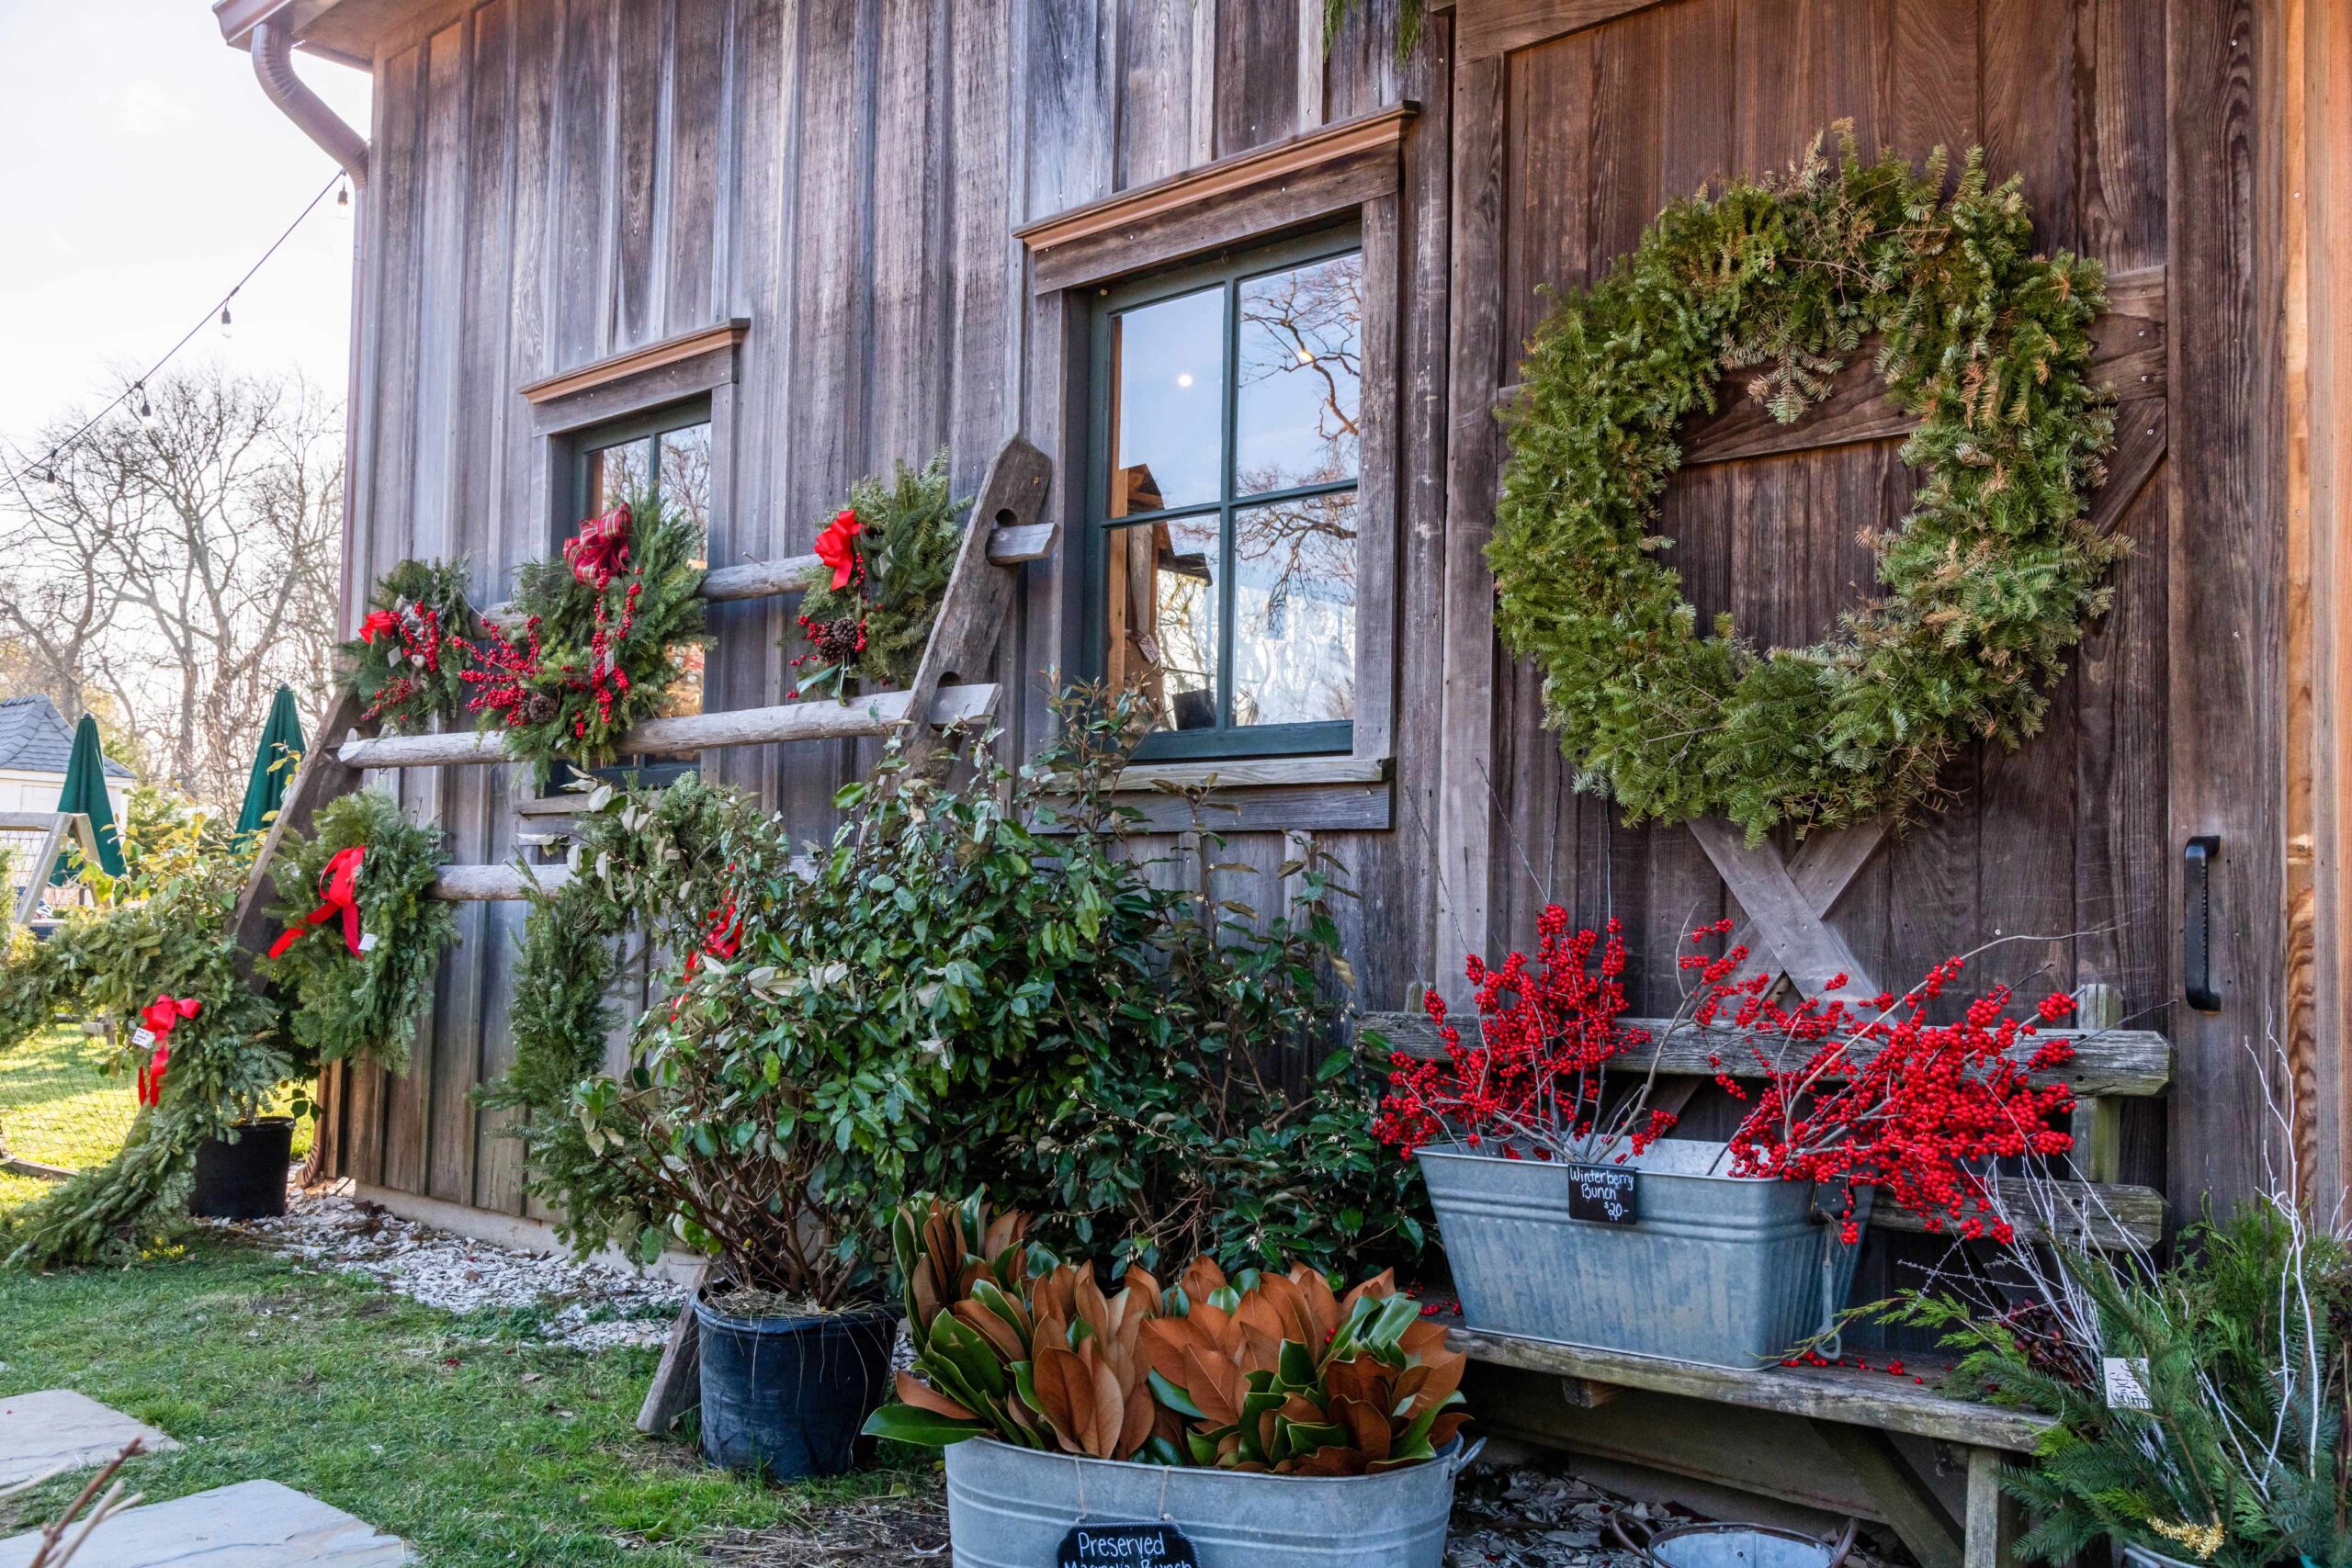 Green wreaths, red blows, and red winterberry branches displayed on the barn at Beach Plum Farm on a sunny day